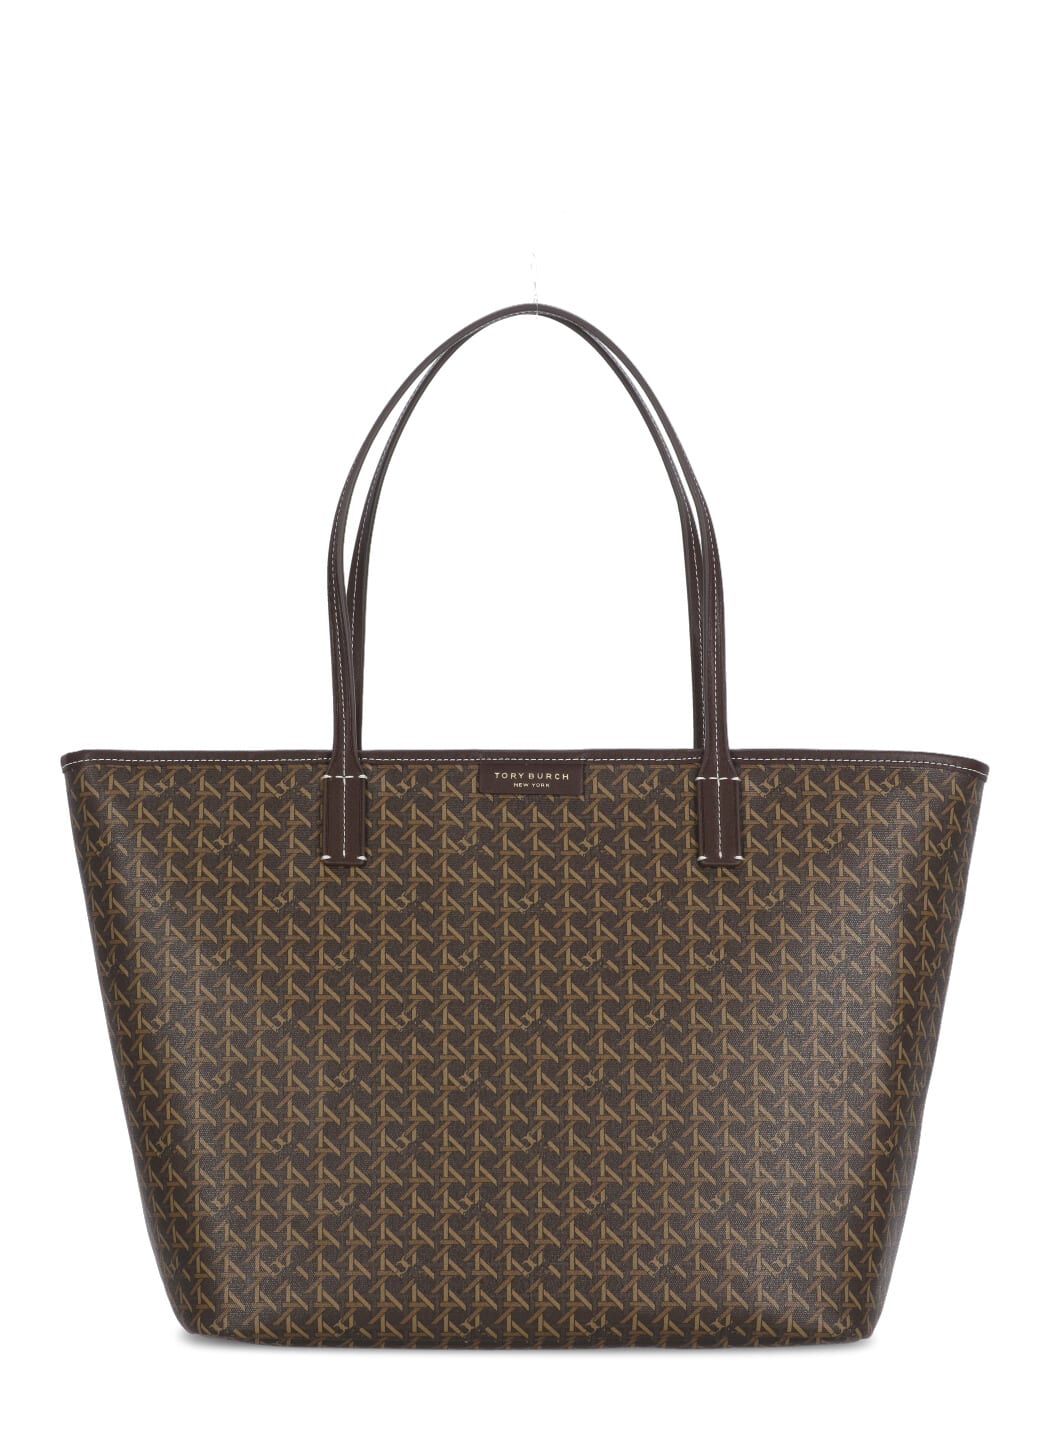 Tory Burch Ever-ready Zip Tote Bag